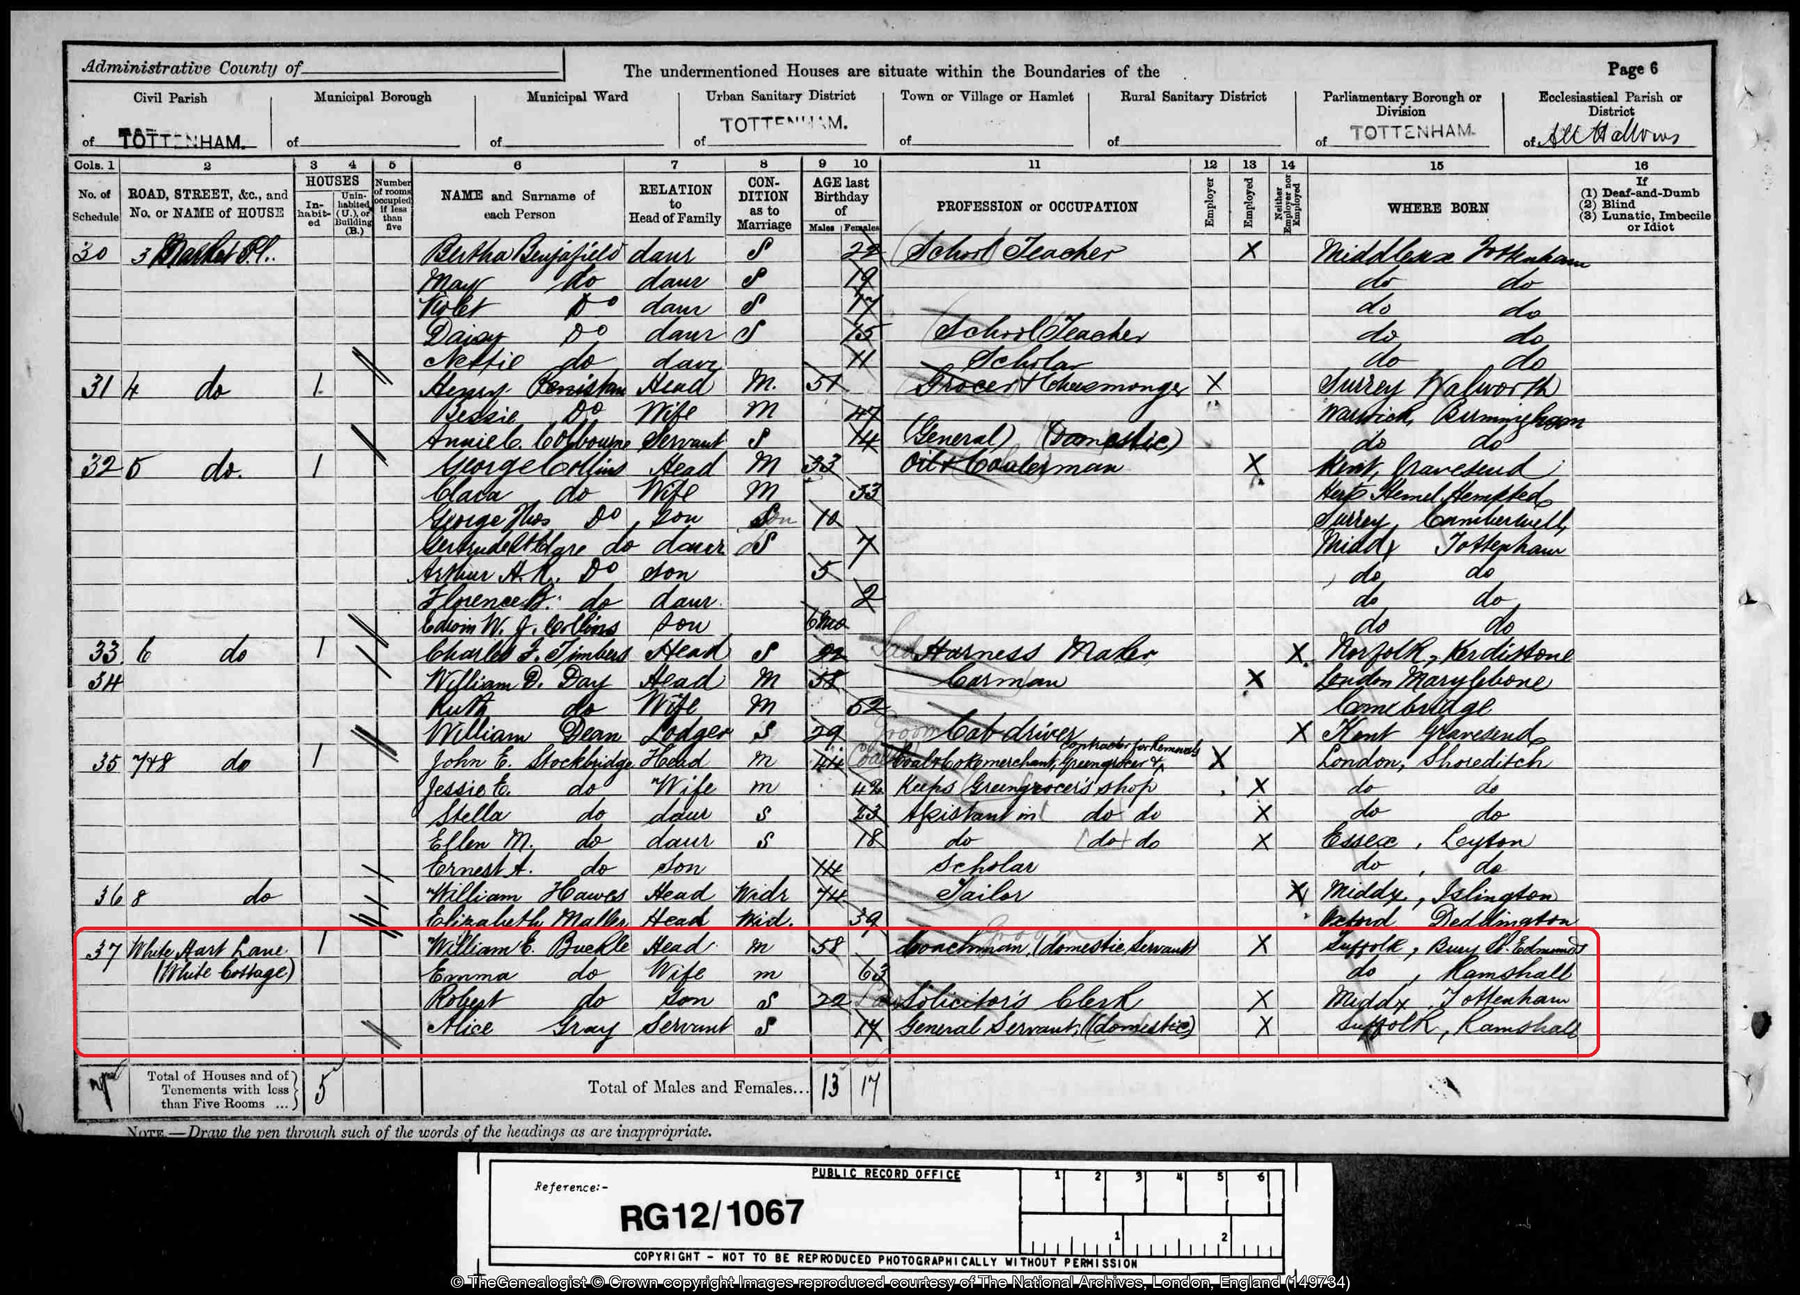 1891 census finds the Buckles of White Cottage, White Hart Lane